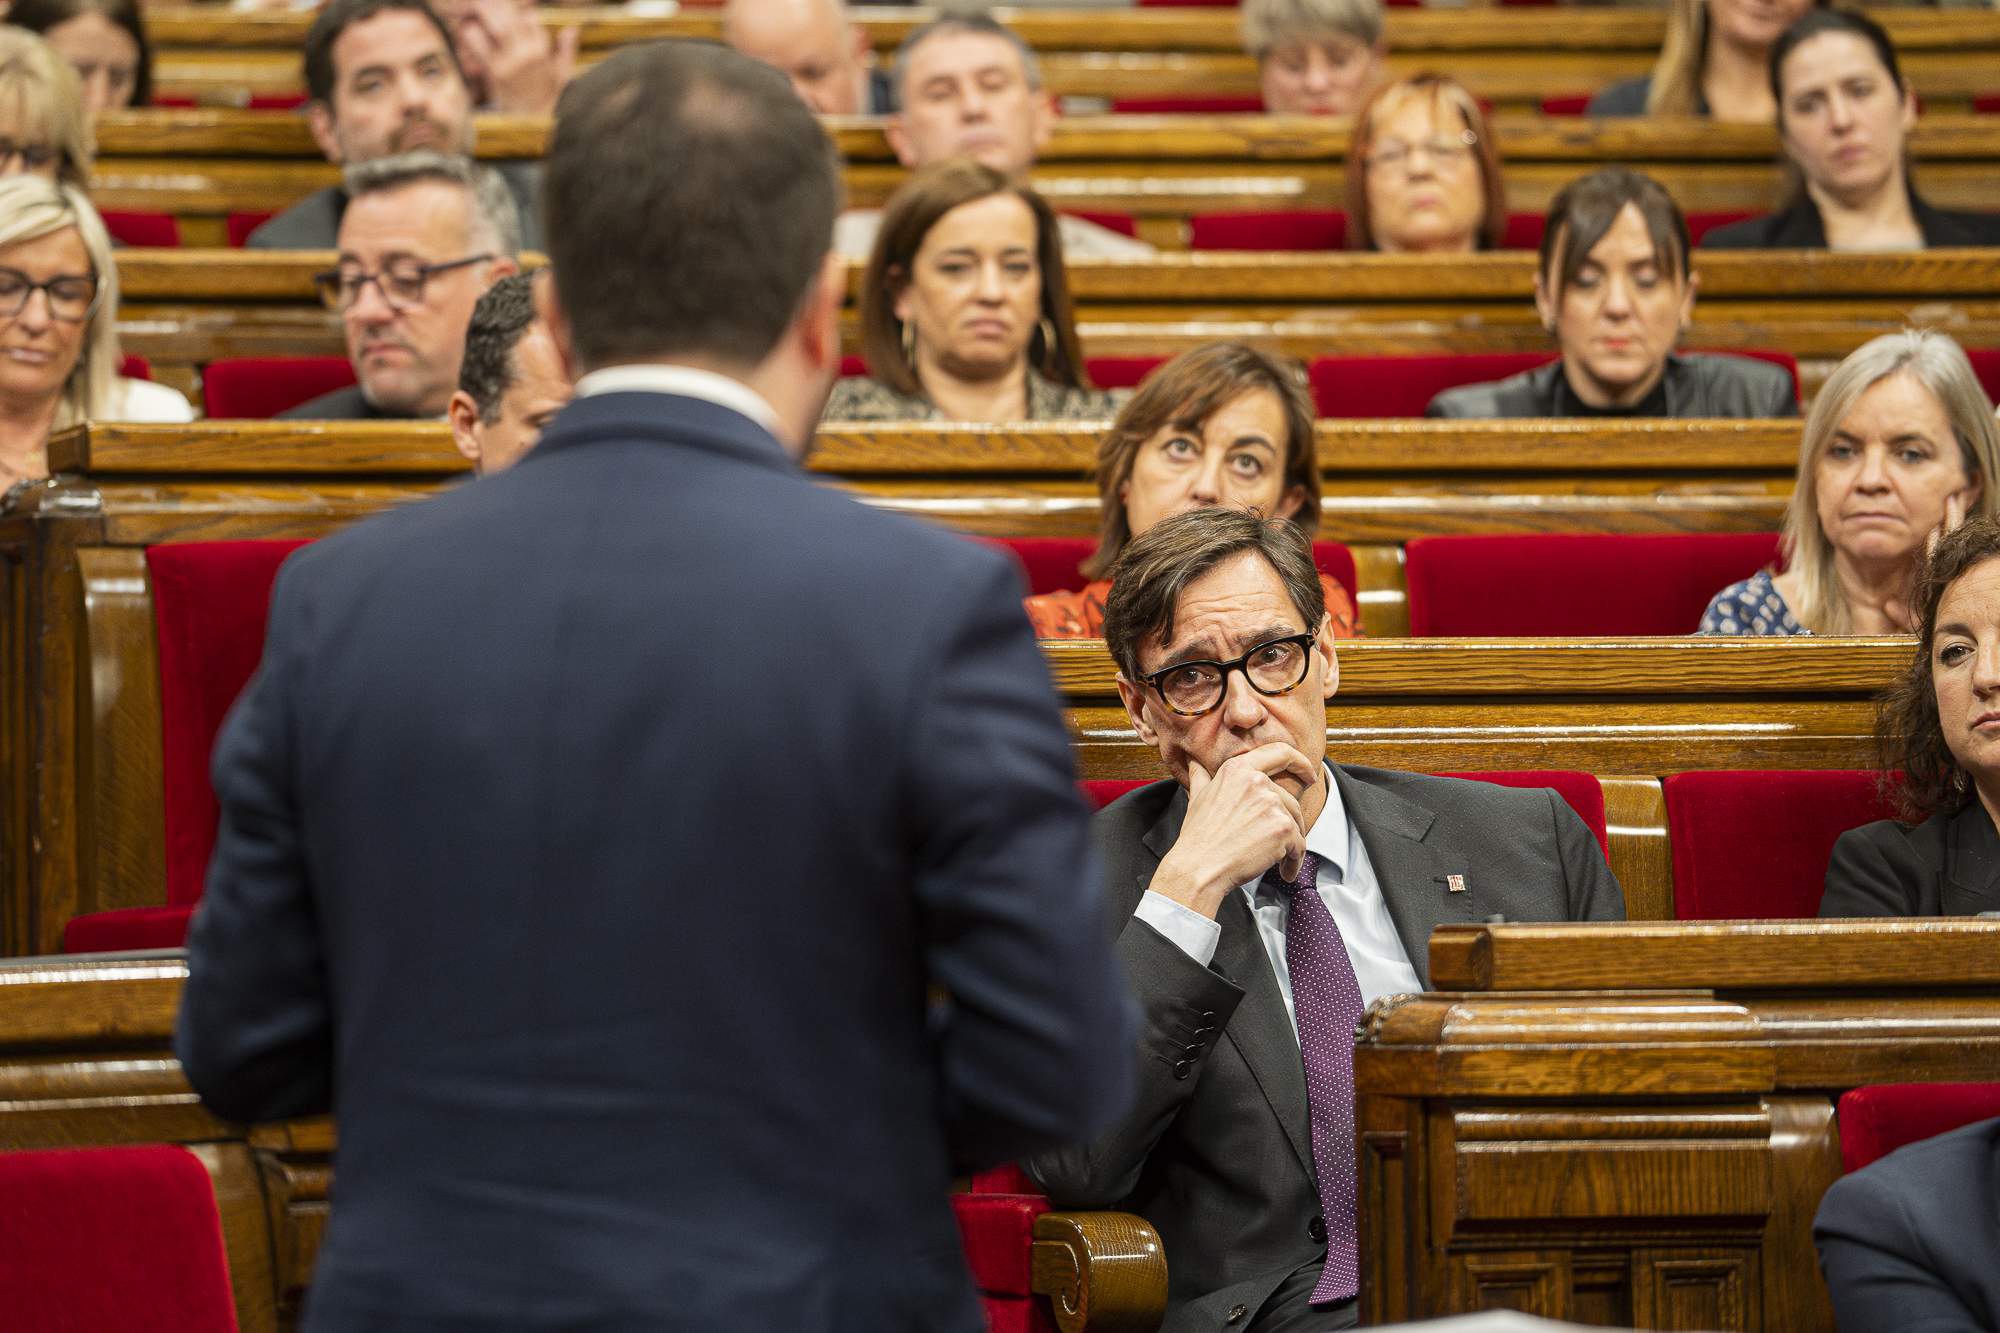 PSC leader Illa celebrates early election: "Catalonia needs a president, not a candidate"